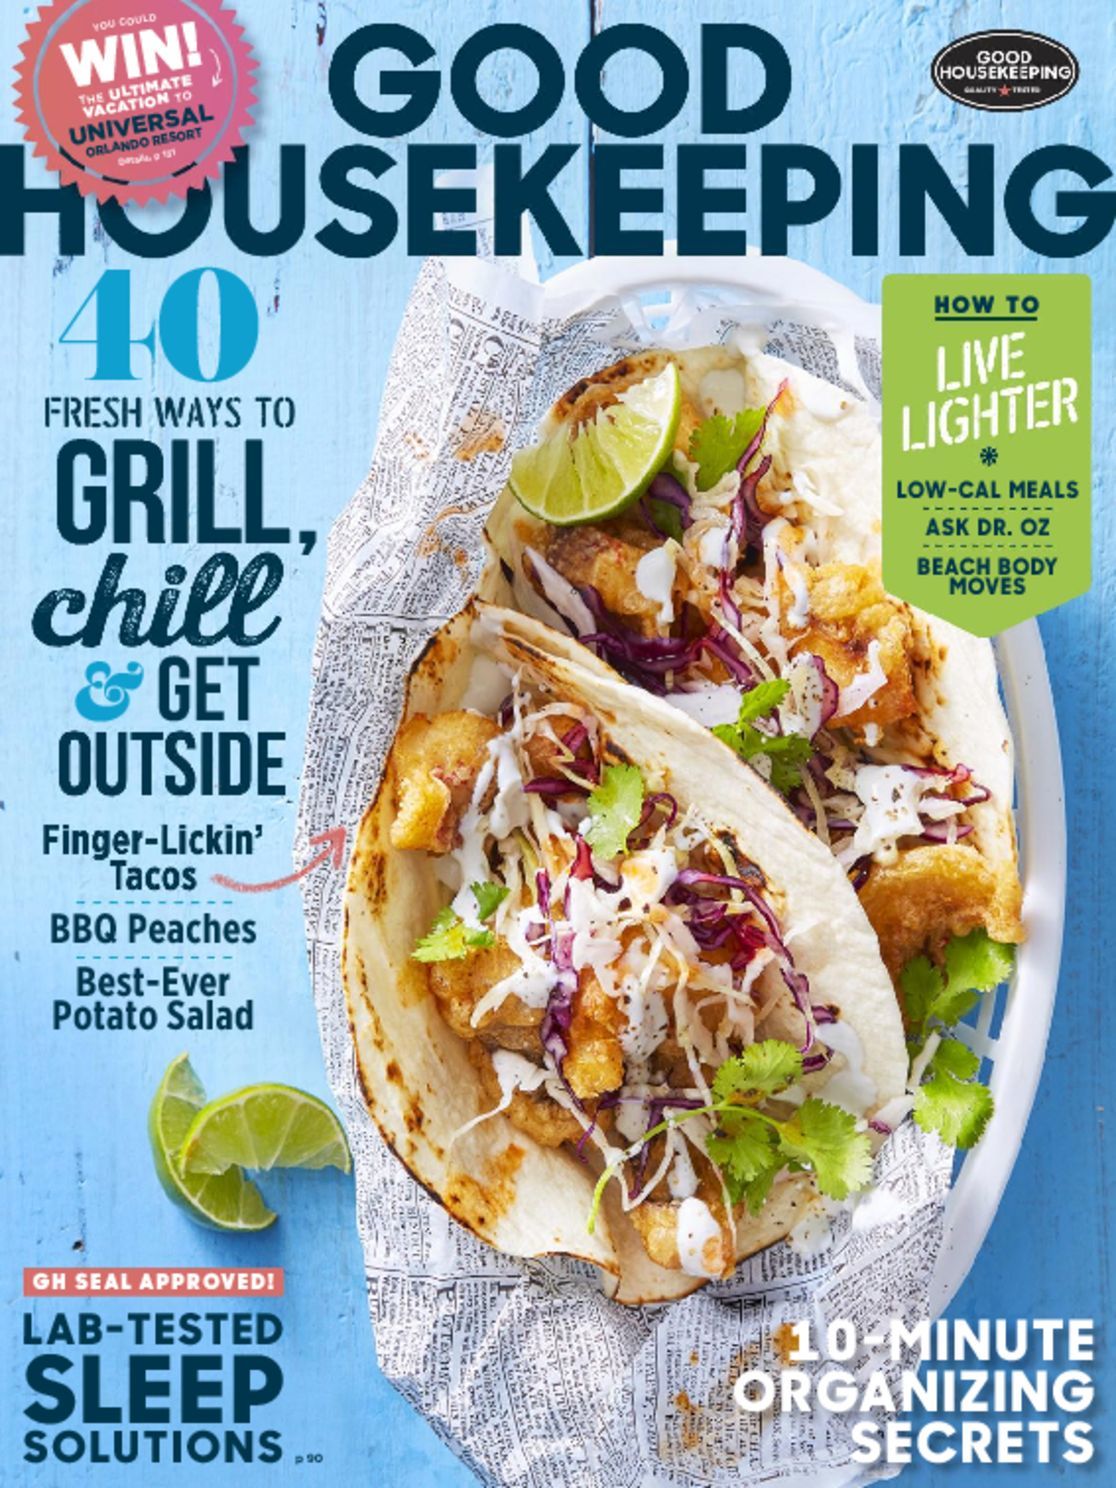 Oneyear subscription to Good Housekeeping for 4.95 through tomorrow